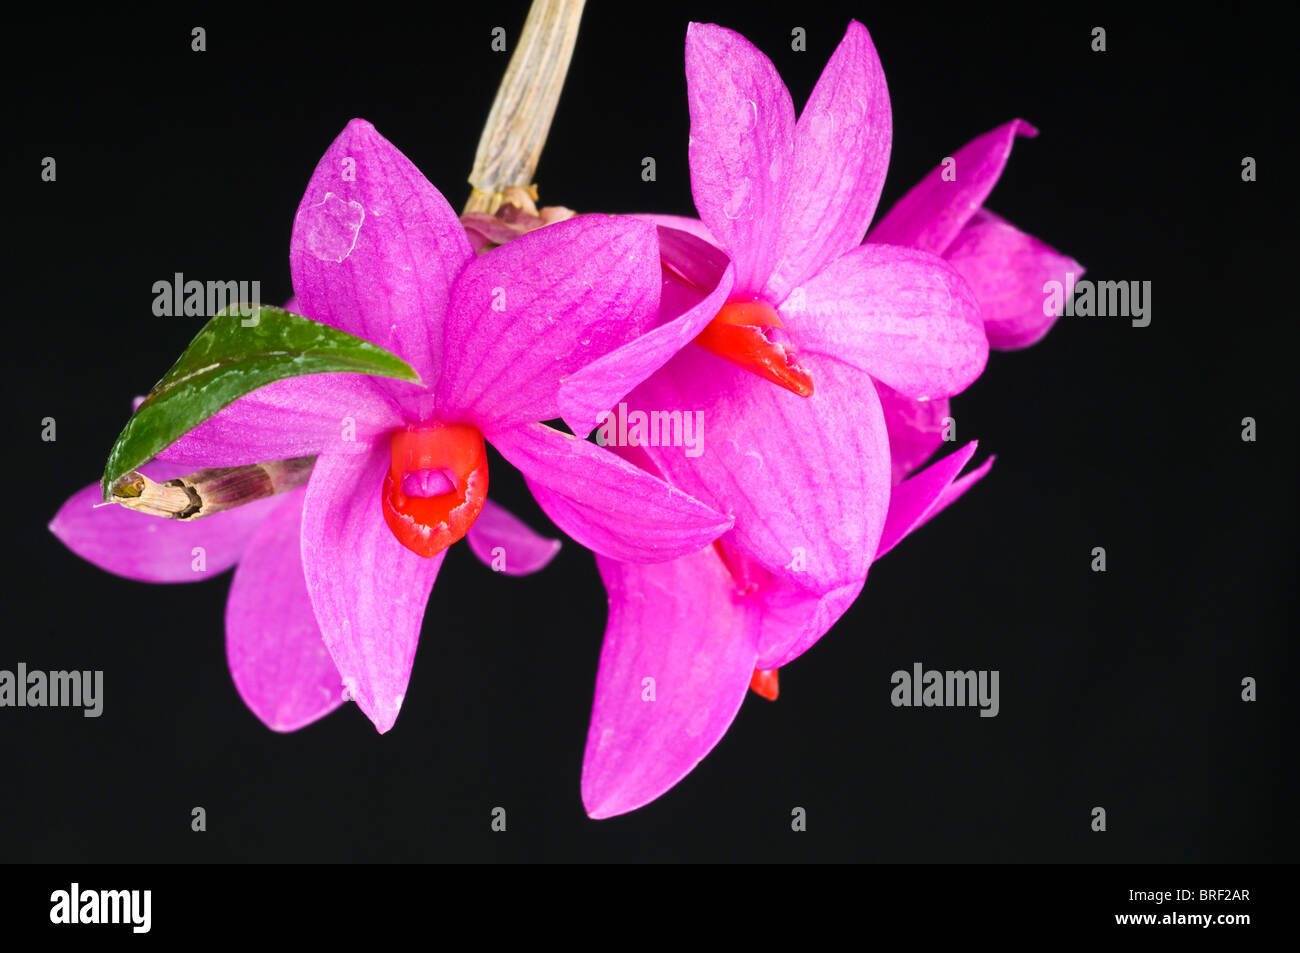 Dendrobium sulawesiense, orchid species, native to Sulawesi region of Indonesia; black background Stock Photo